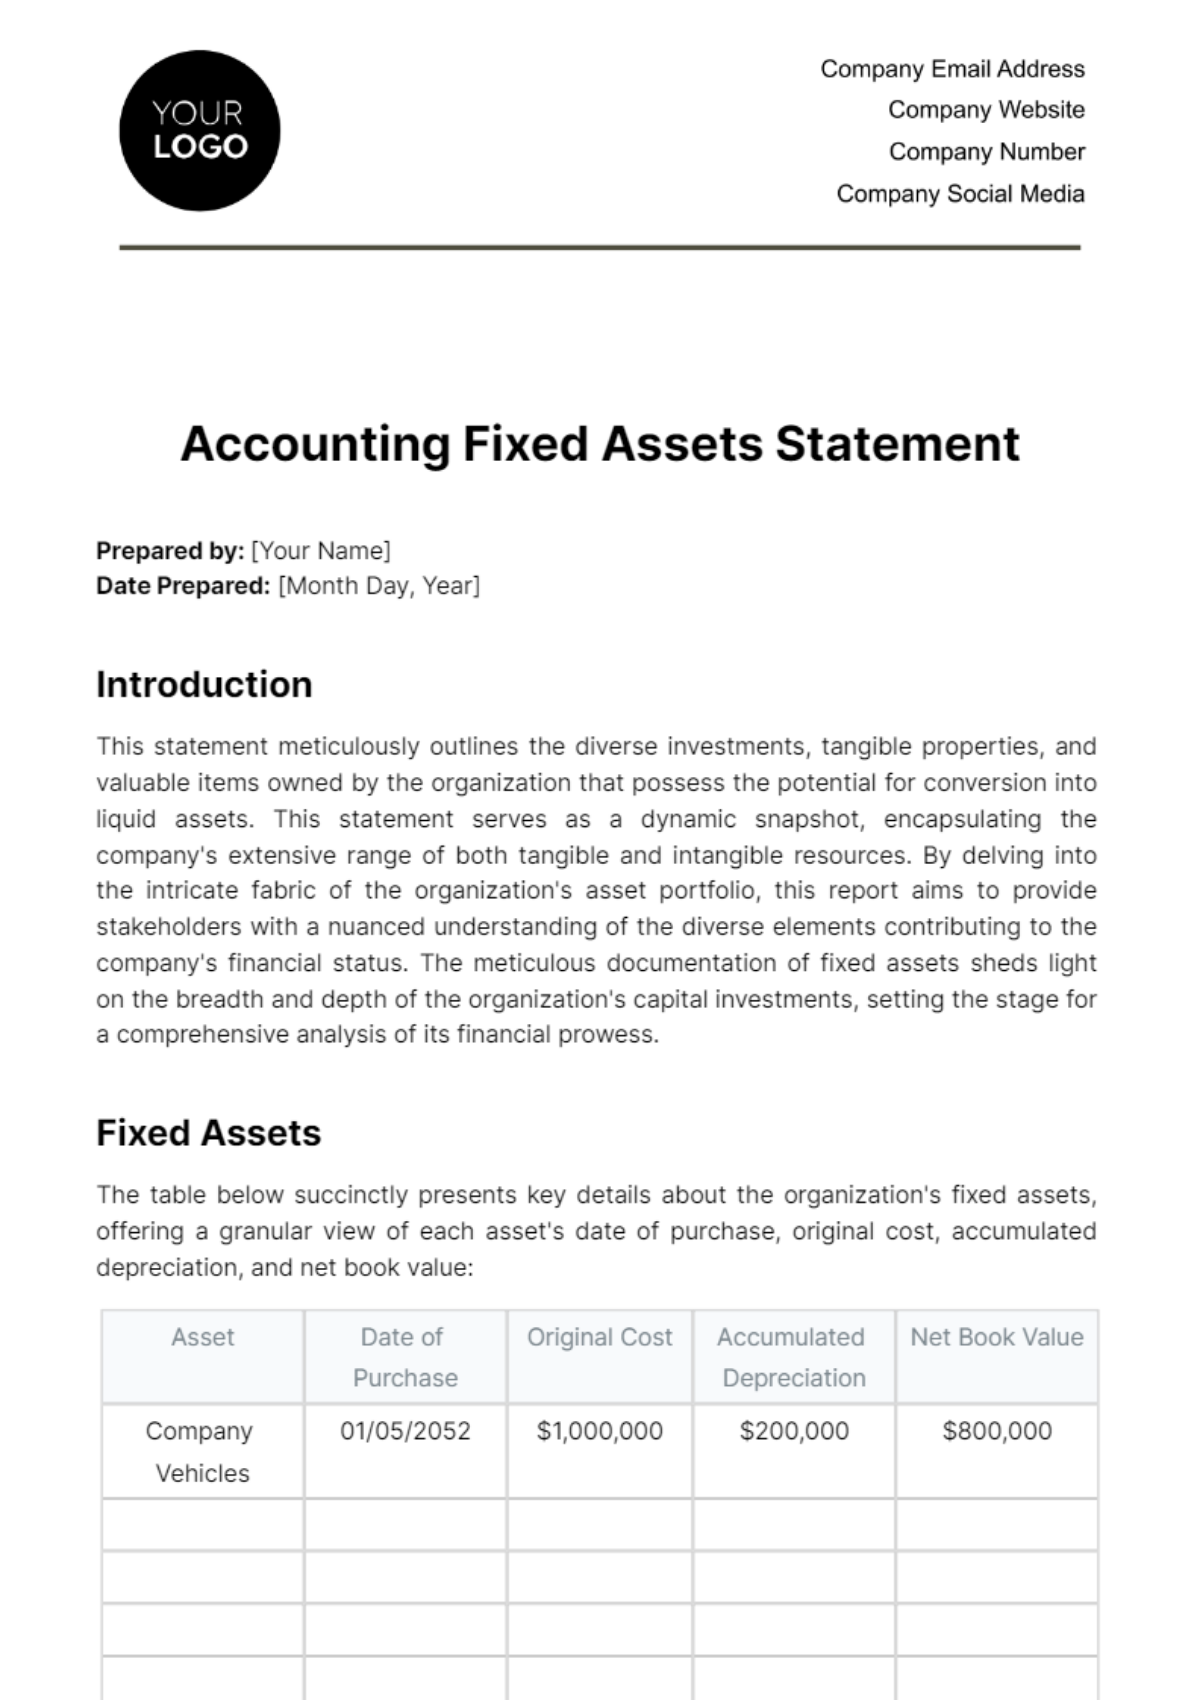 Accounting Fixed Assets Statement Template